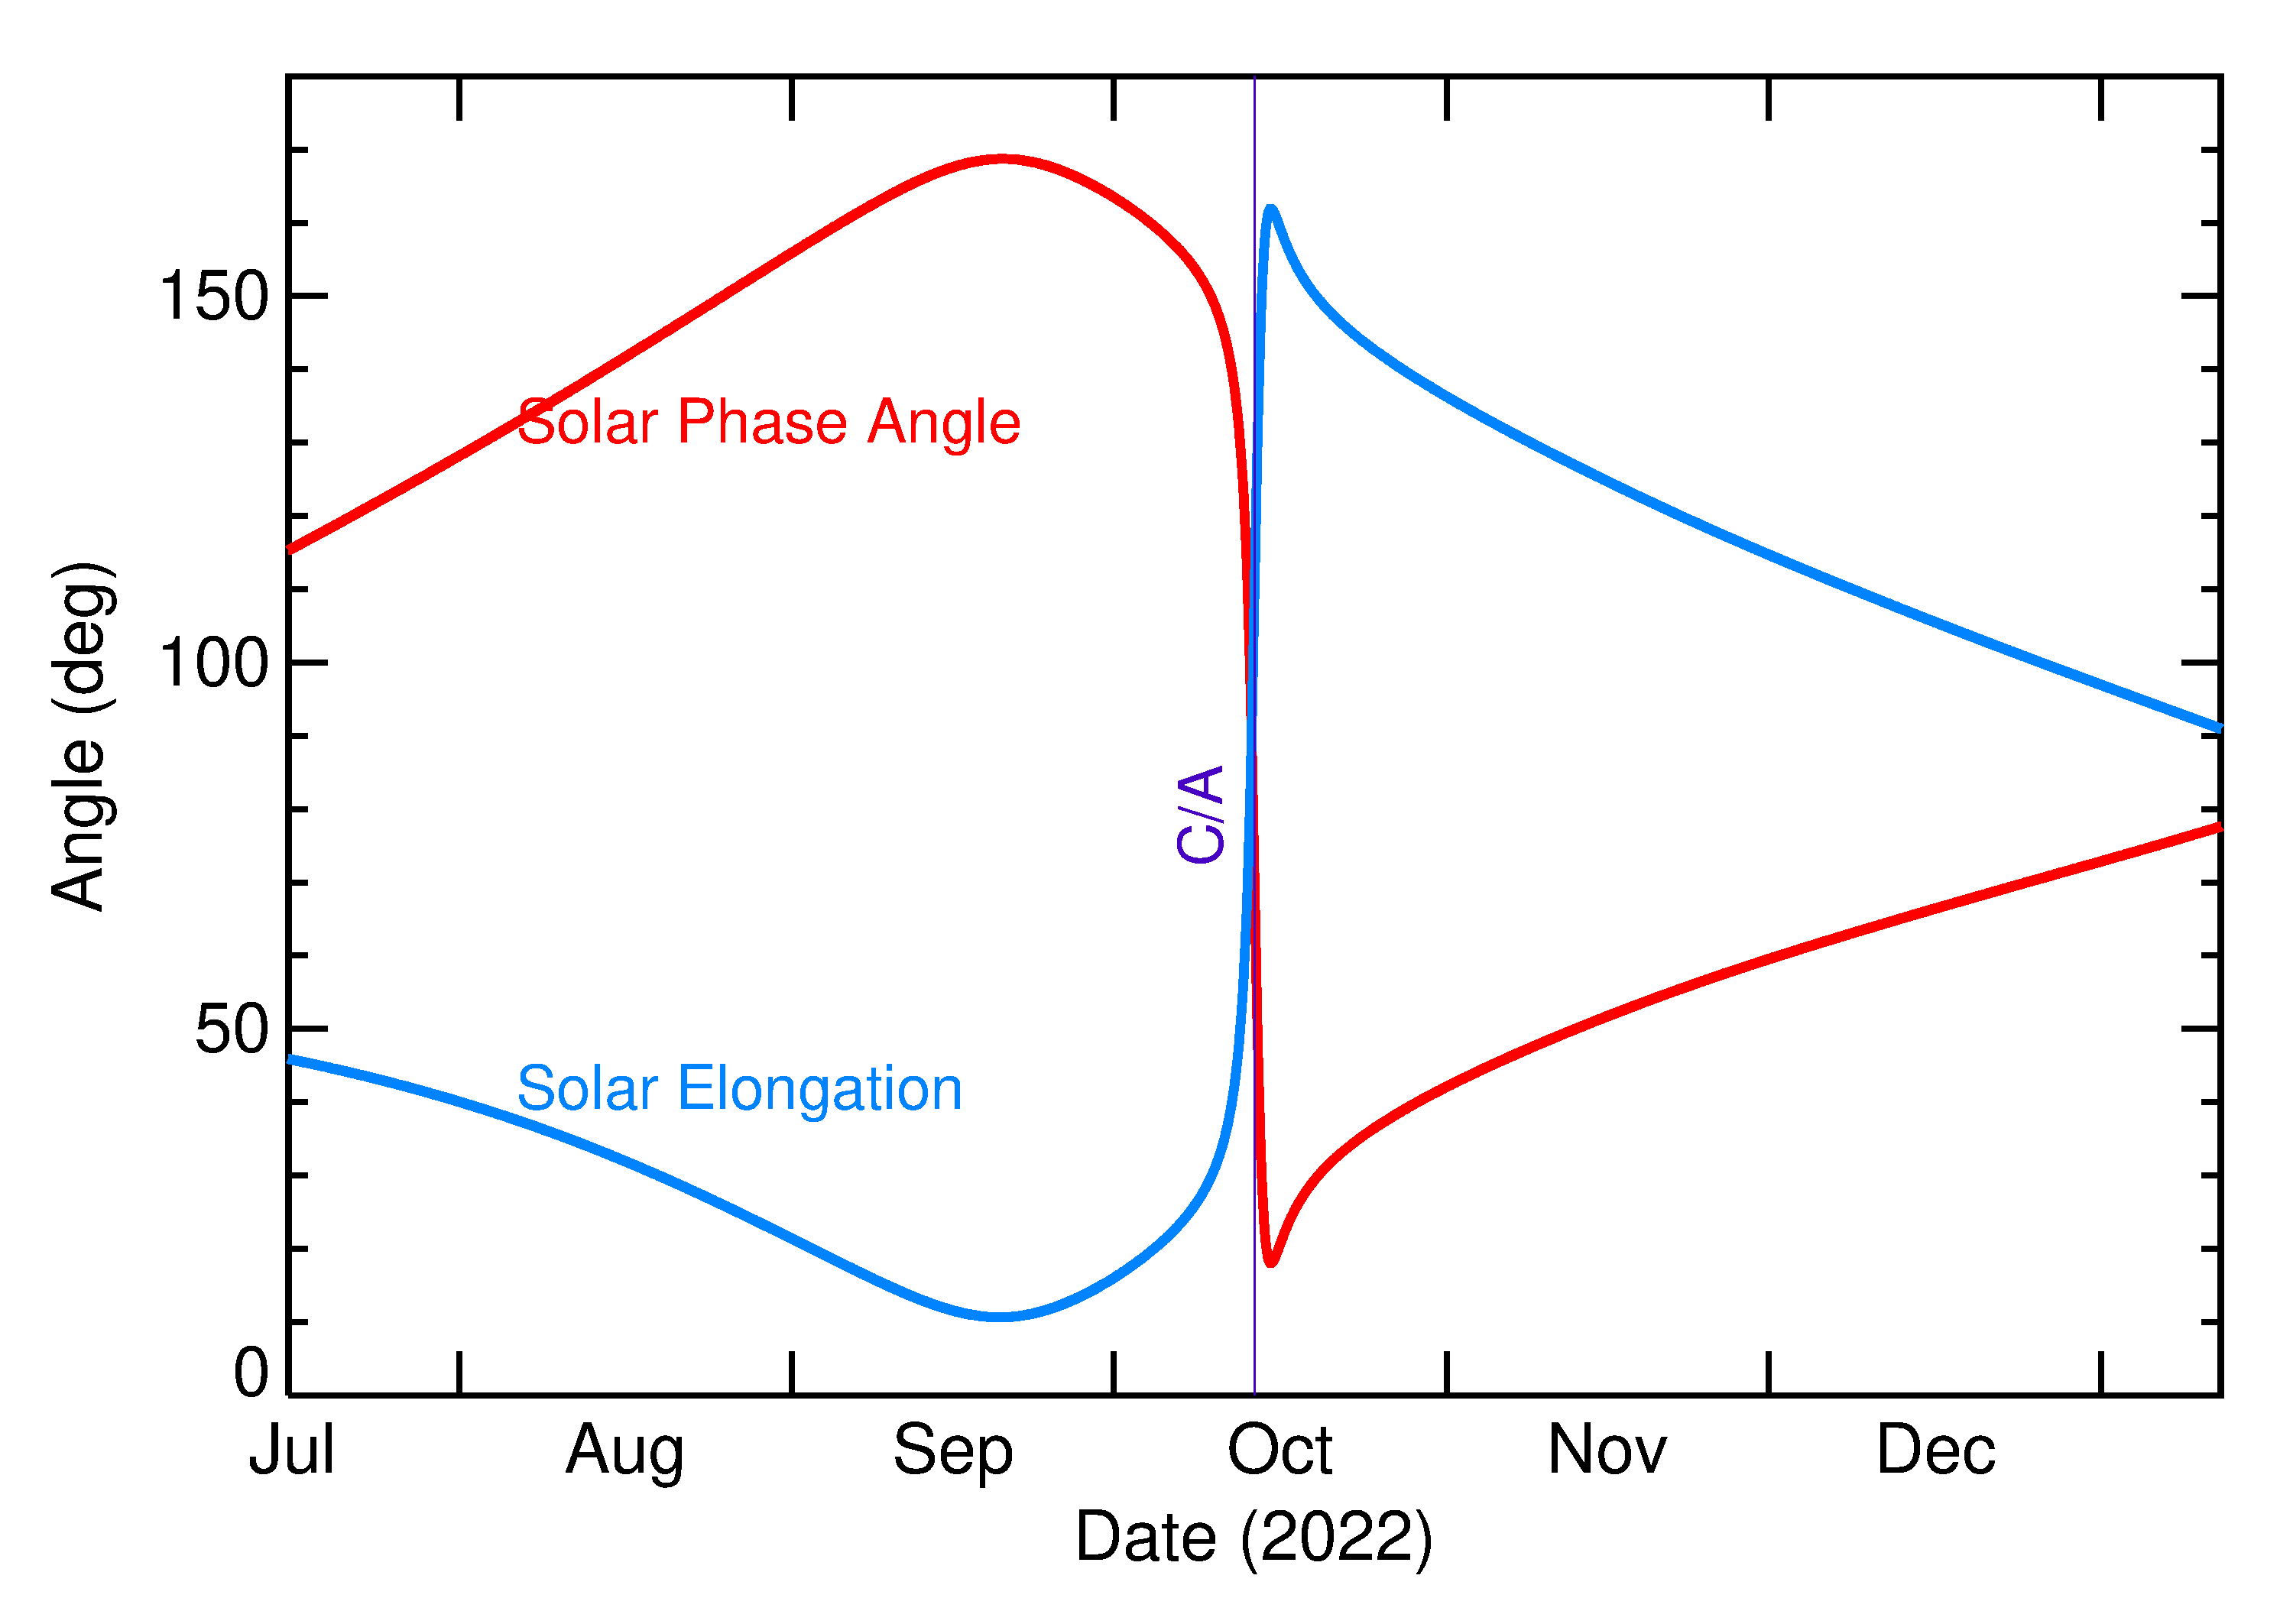 Solar Elongation and Solar Phase Angle of 2022 TW2 in the months around closest approach